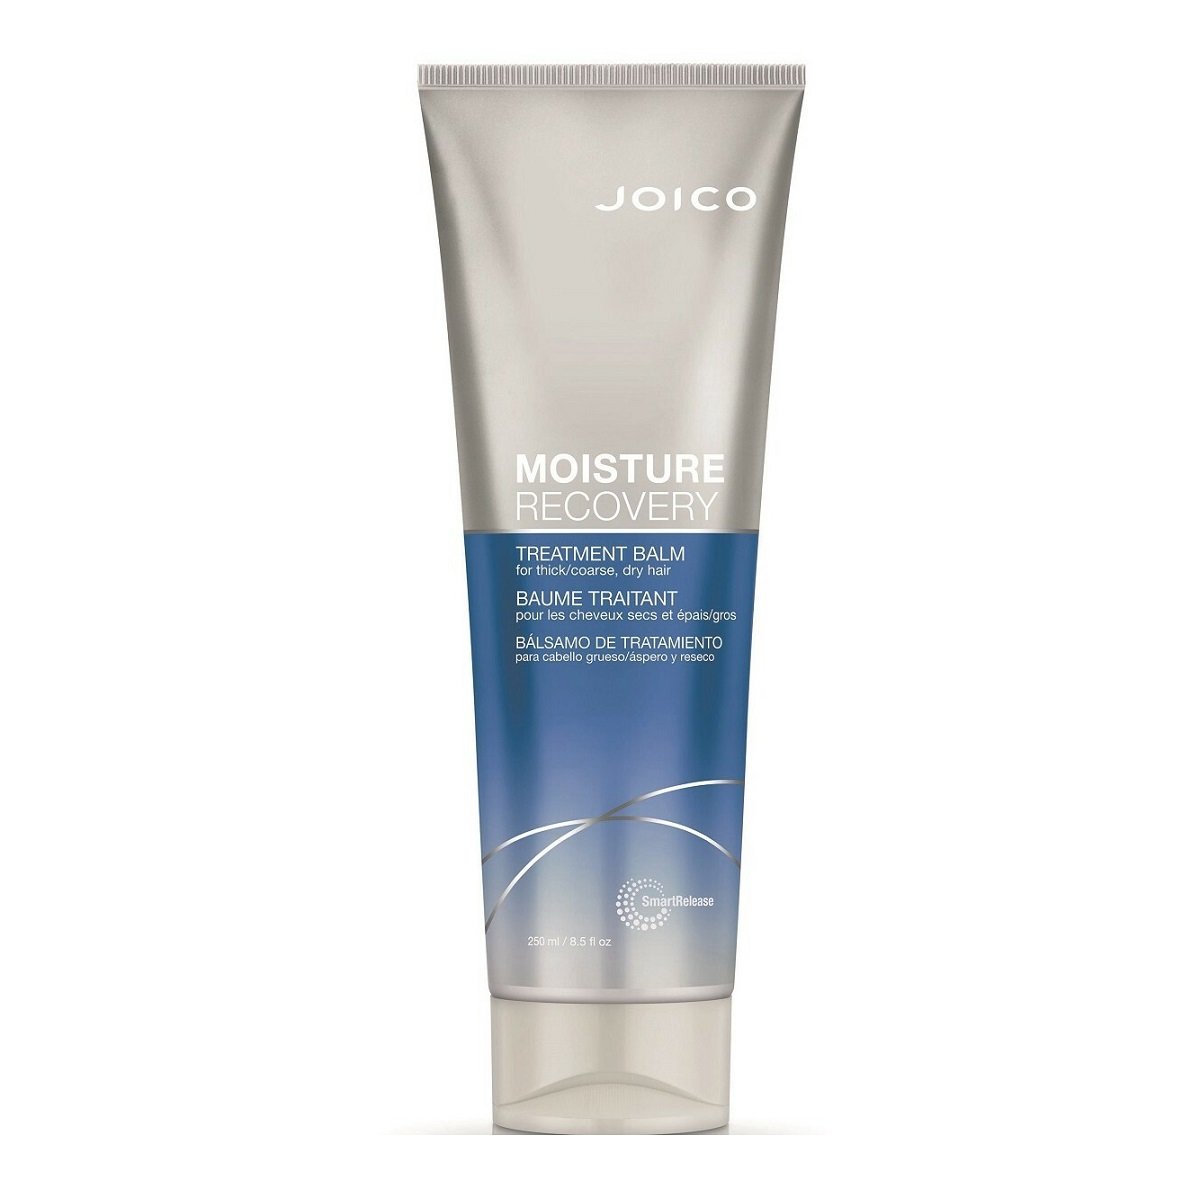 Joico Restage Moisture Recovery Treatment Balm for Dry Hair